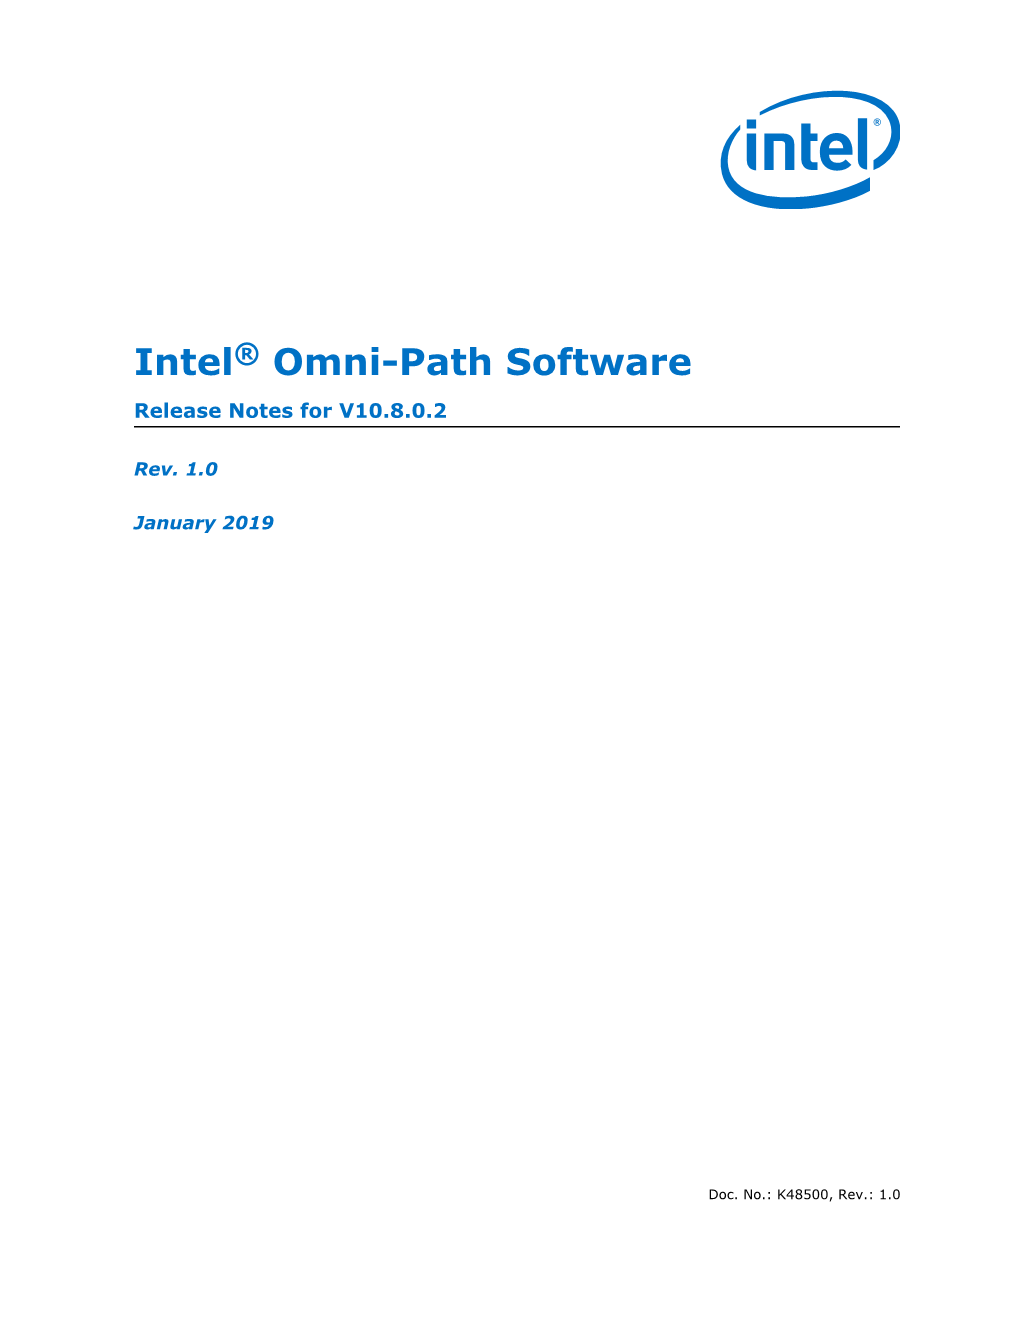 Intel® Omni-Path Software — Release Notes for V10.8.0.2